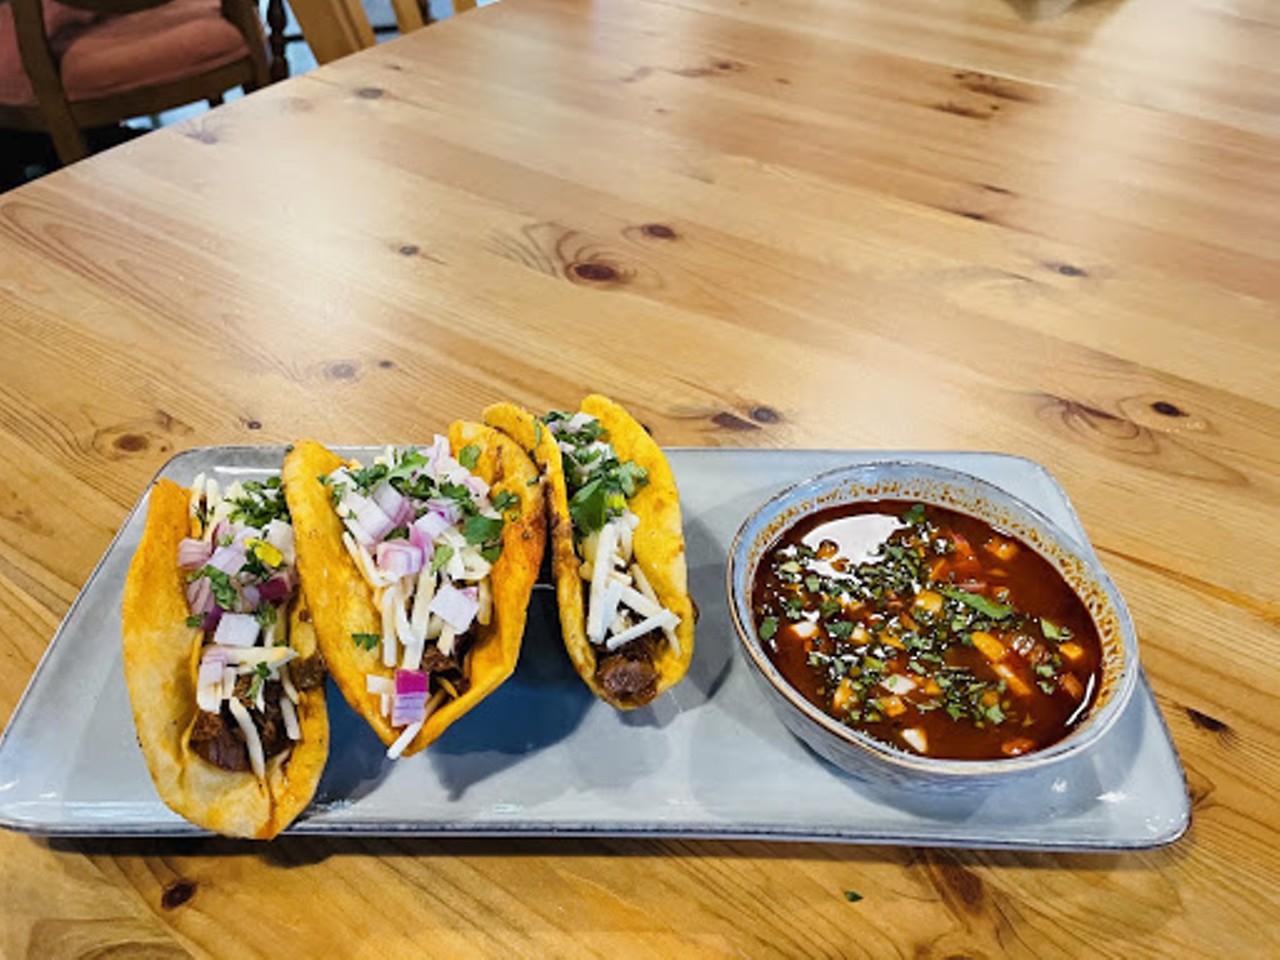 Persimmon Hollow Lake Eola
227 N Eola Dr
Birria Tacos 
3 soft tortillas, jackfruit, onions, cilantro, and vegan mozzarella cheese, served with birria sauce and a side of homemade hot sauce.
Some restaurants offering larger selection, side and drinks. Click here to see the menus.